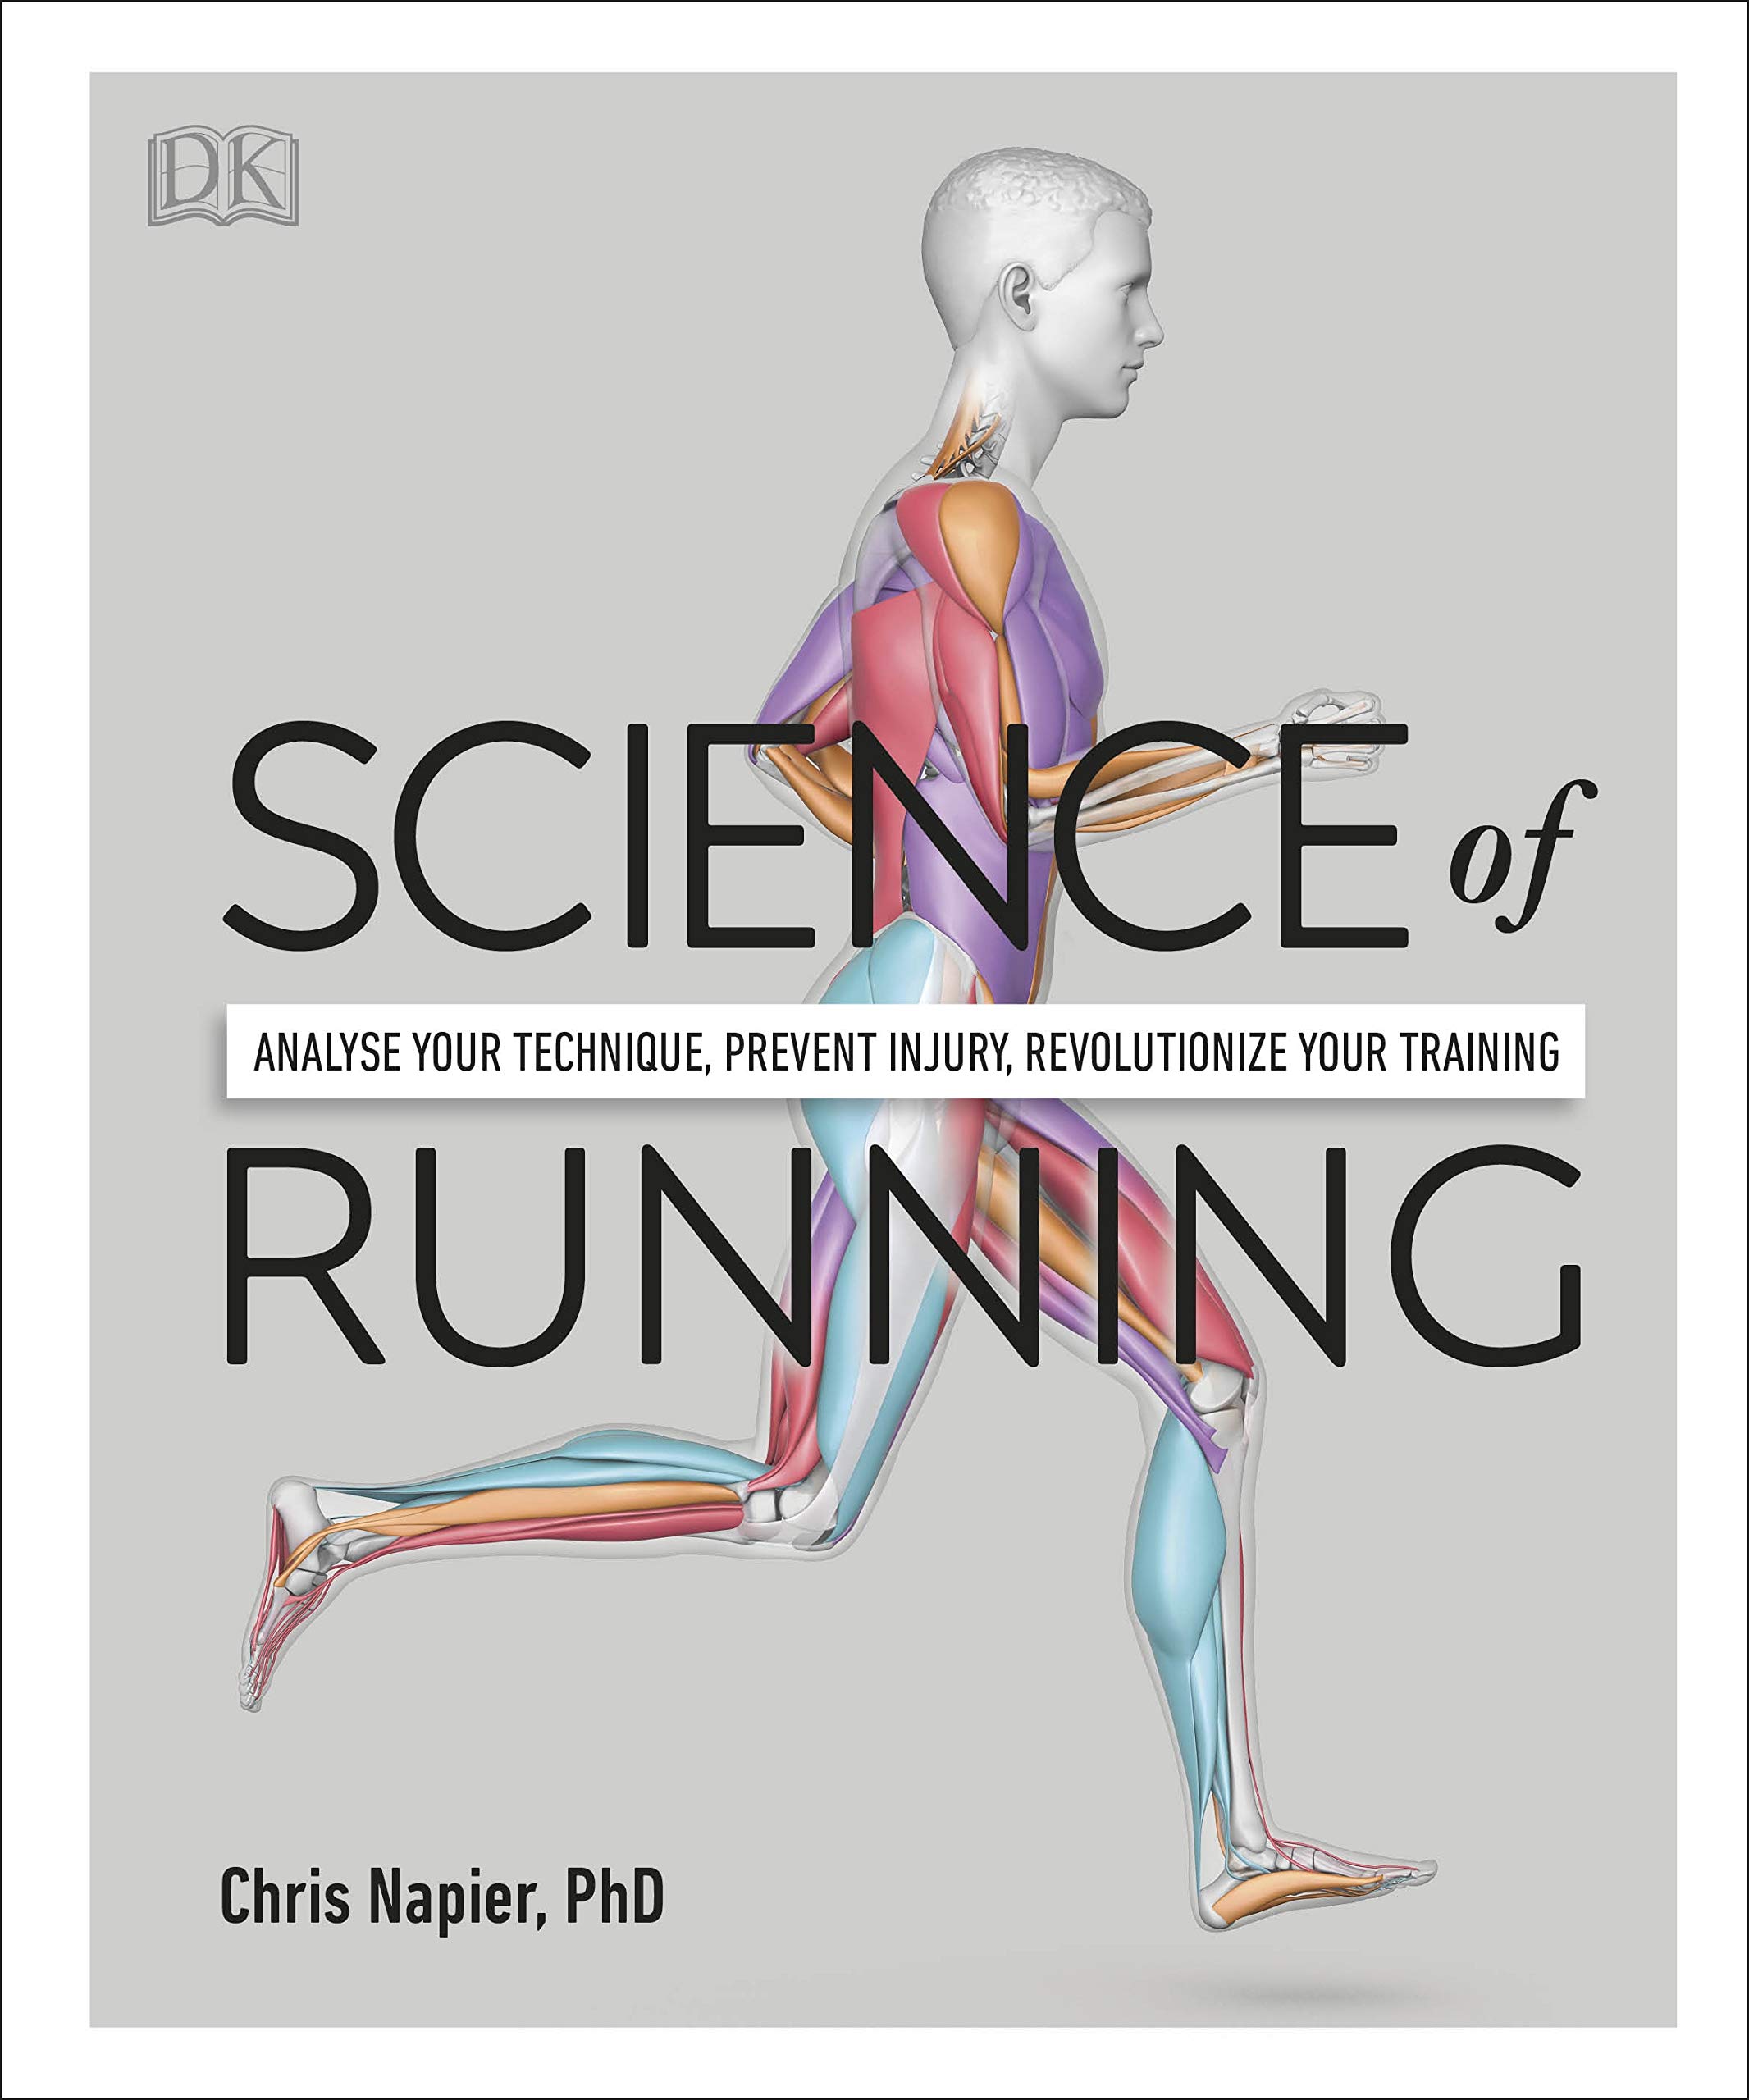 Science Of Running: Analyse Your Technique, Prevent Injury, Revolutionize Your Training 
